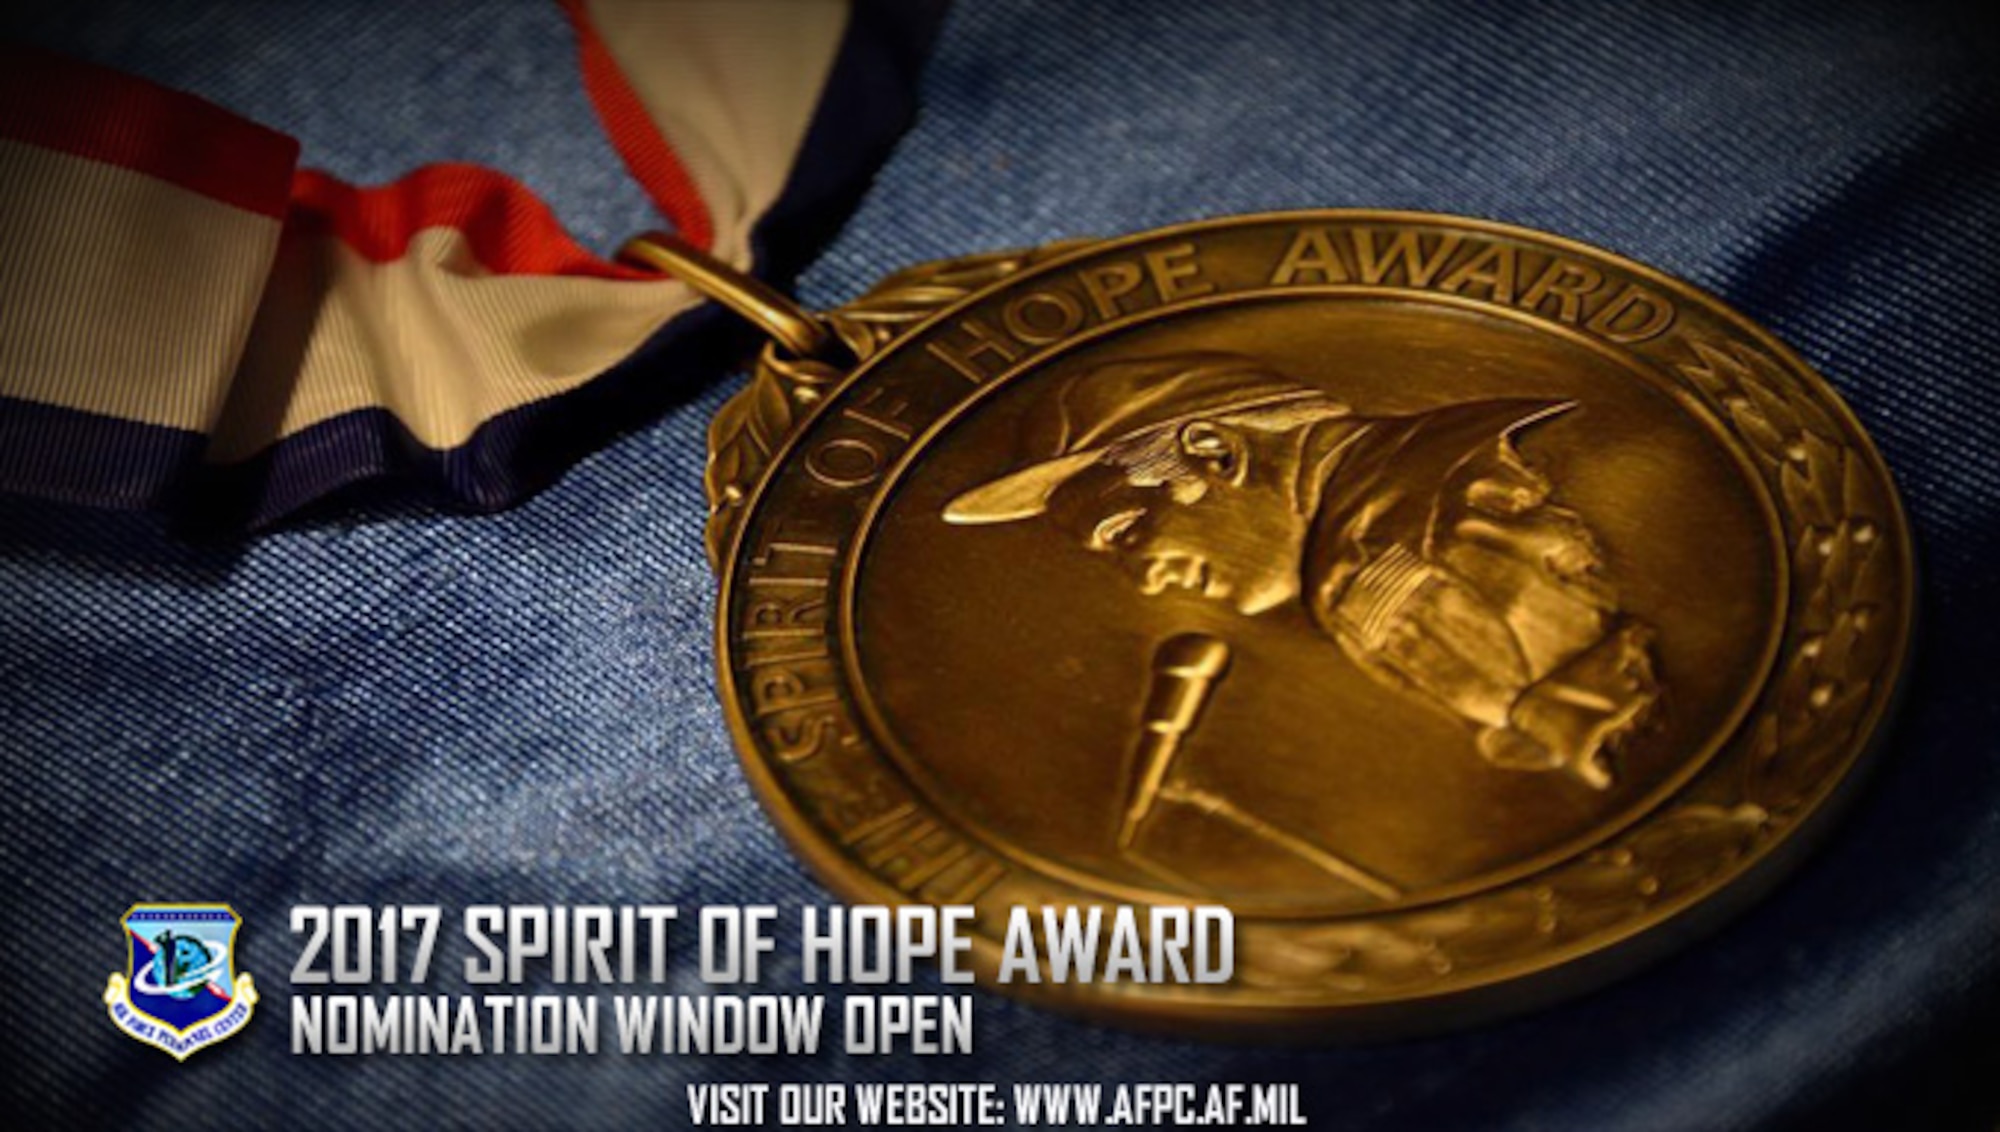 The Spirit of Hope Award is named in honor of Bob Hope and is presented for outstanding service to the United States of America. Nominations are due to the Air Force Personnel center by Feb. 20, 2017. (U.S. Air Force graphic by Staff Sgt. Alexx Pons)